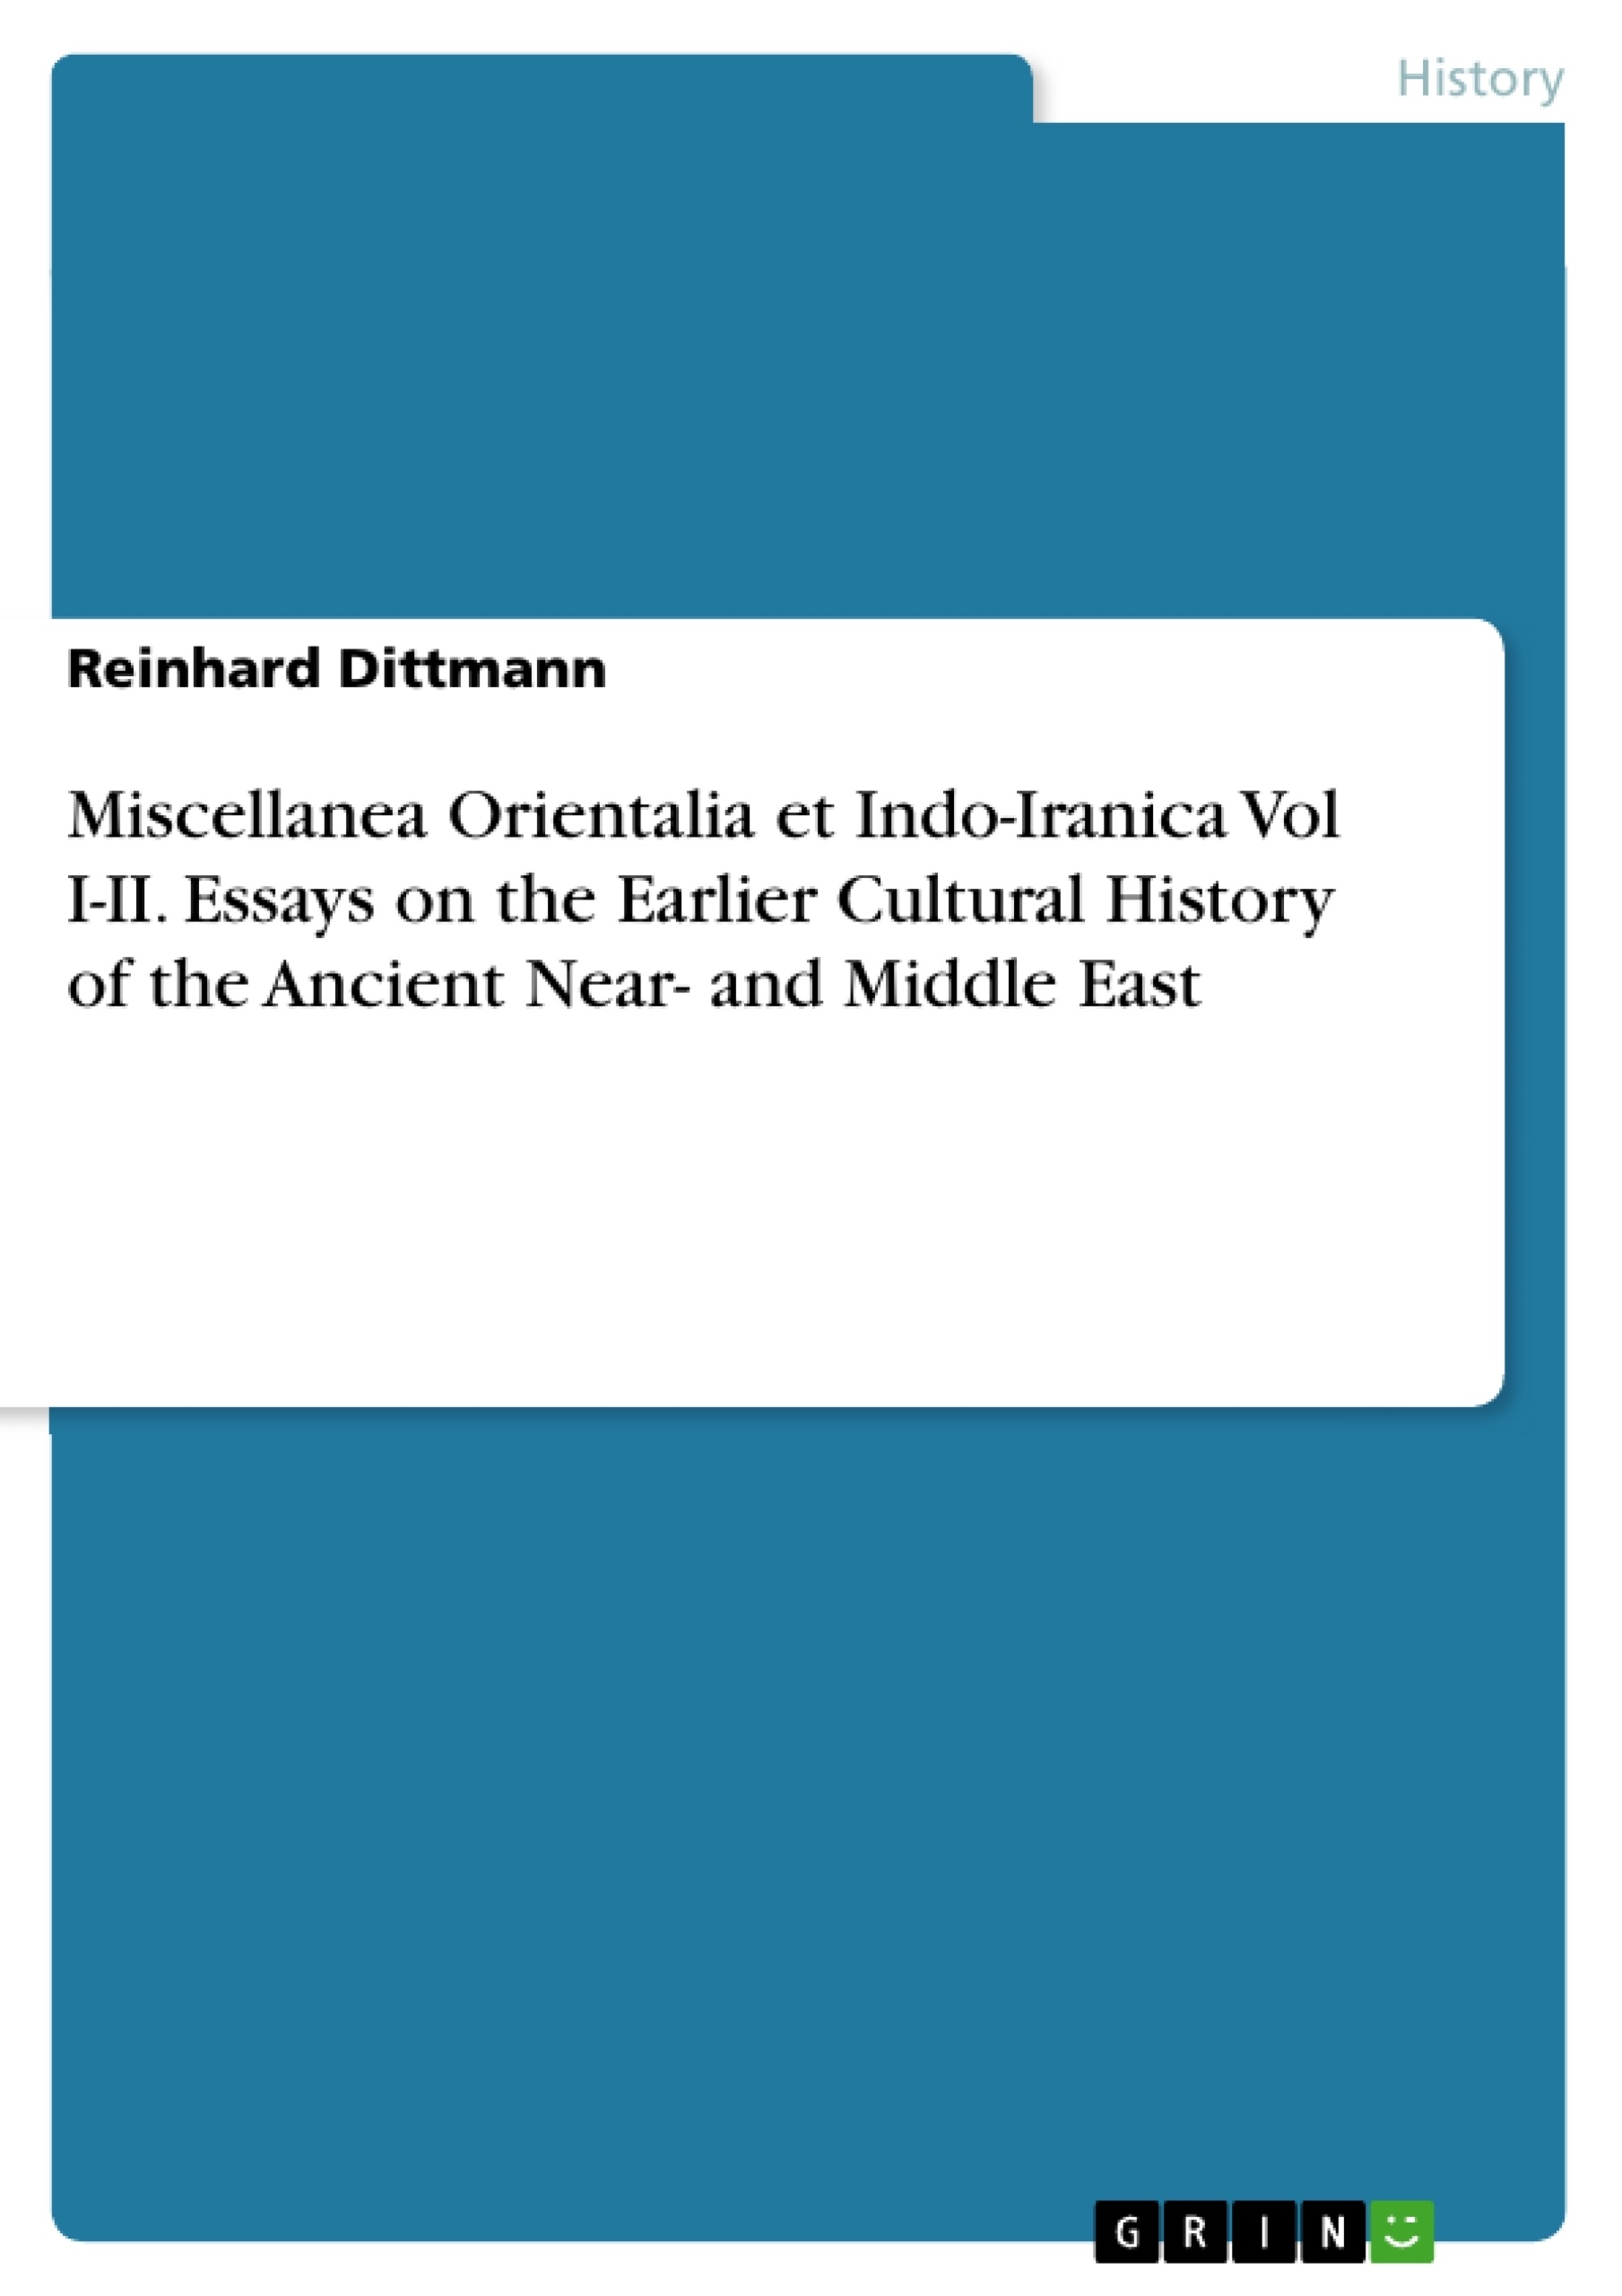 Miscellanea Orientalia et Indo-Iranica Vol I-II. Essays on the Earlier  Cultural History of the Ancient Near- and Middle East - GRIN